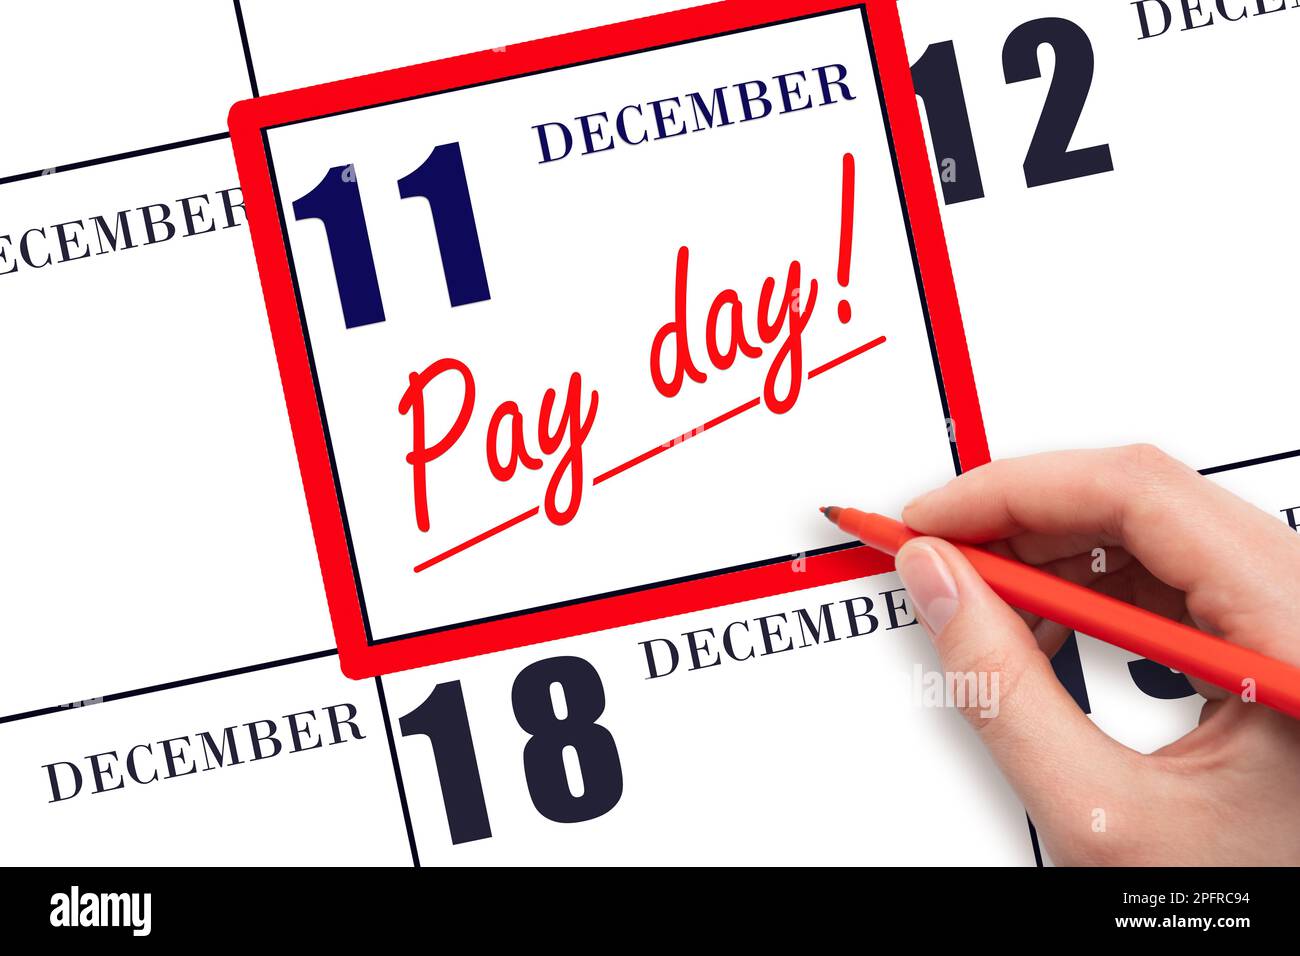 11th day of December. Hand writing text PAY DATE on calendar date December 11 and underline it. Payment due date.  Reminder concept of payment. Winter Stock Photo